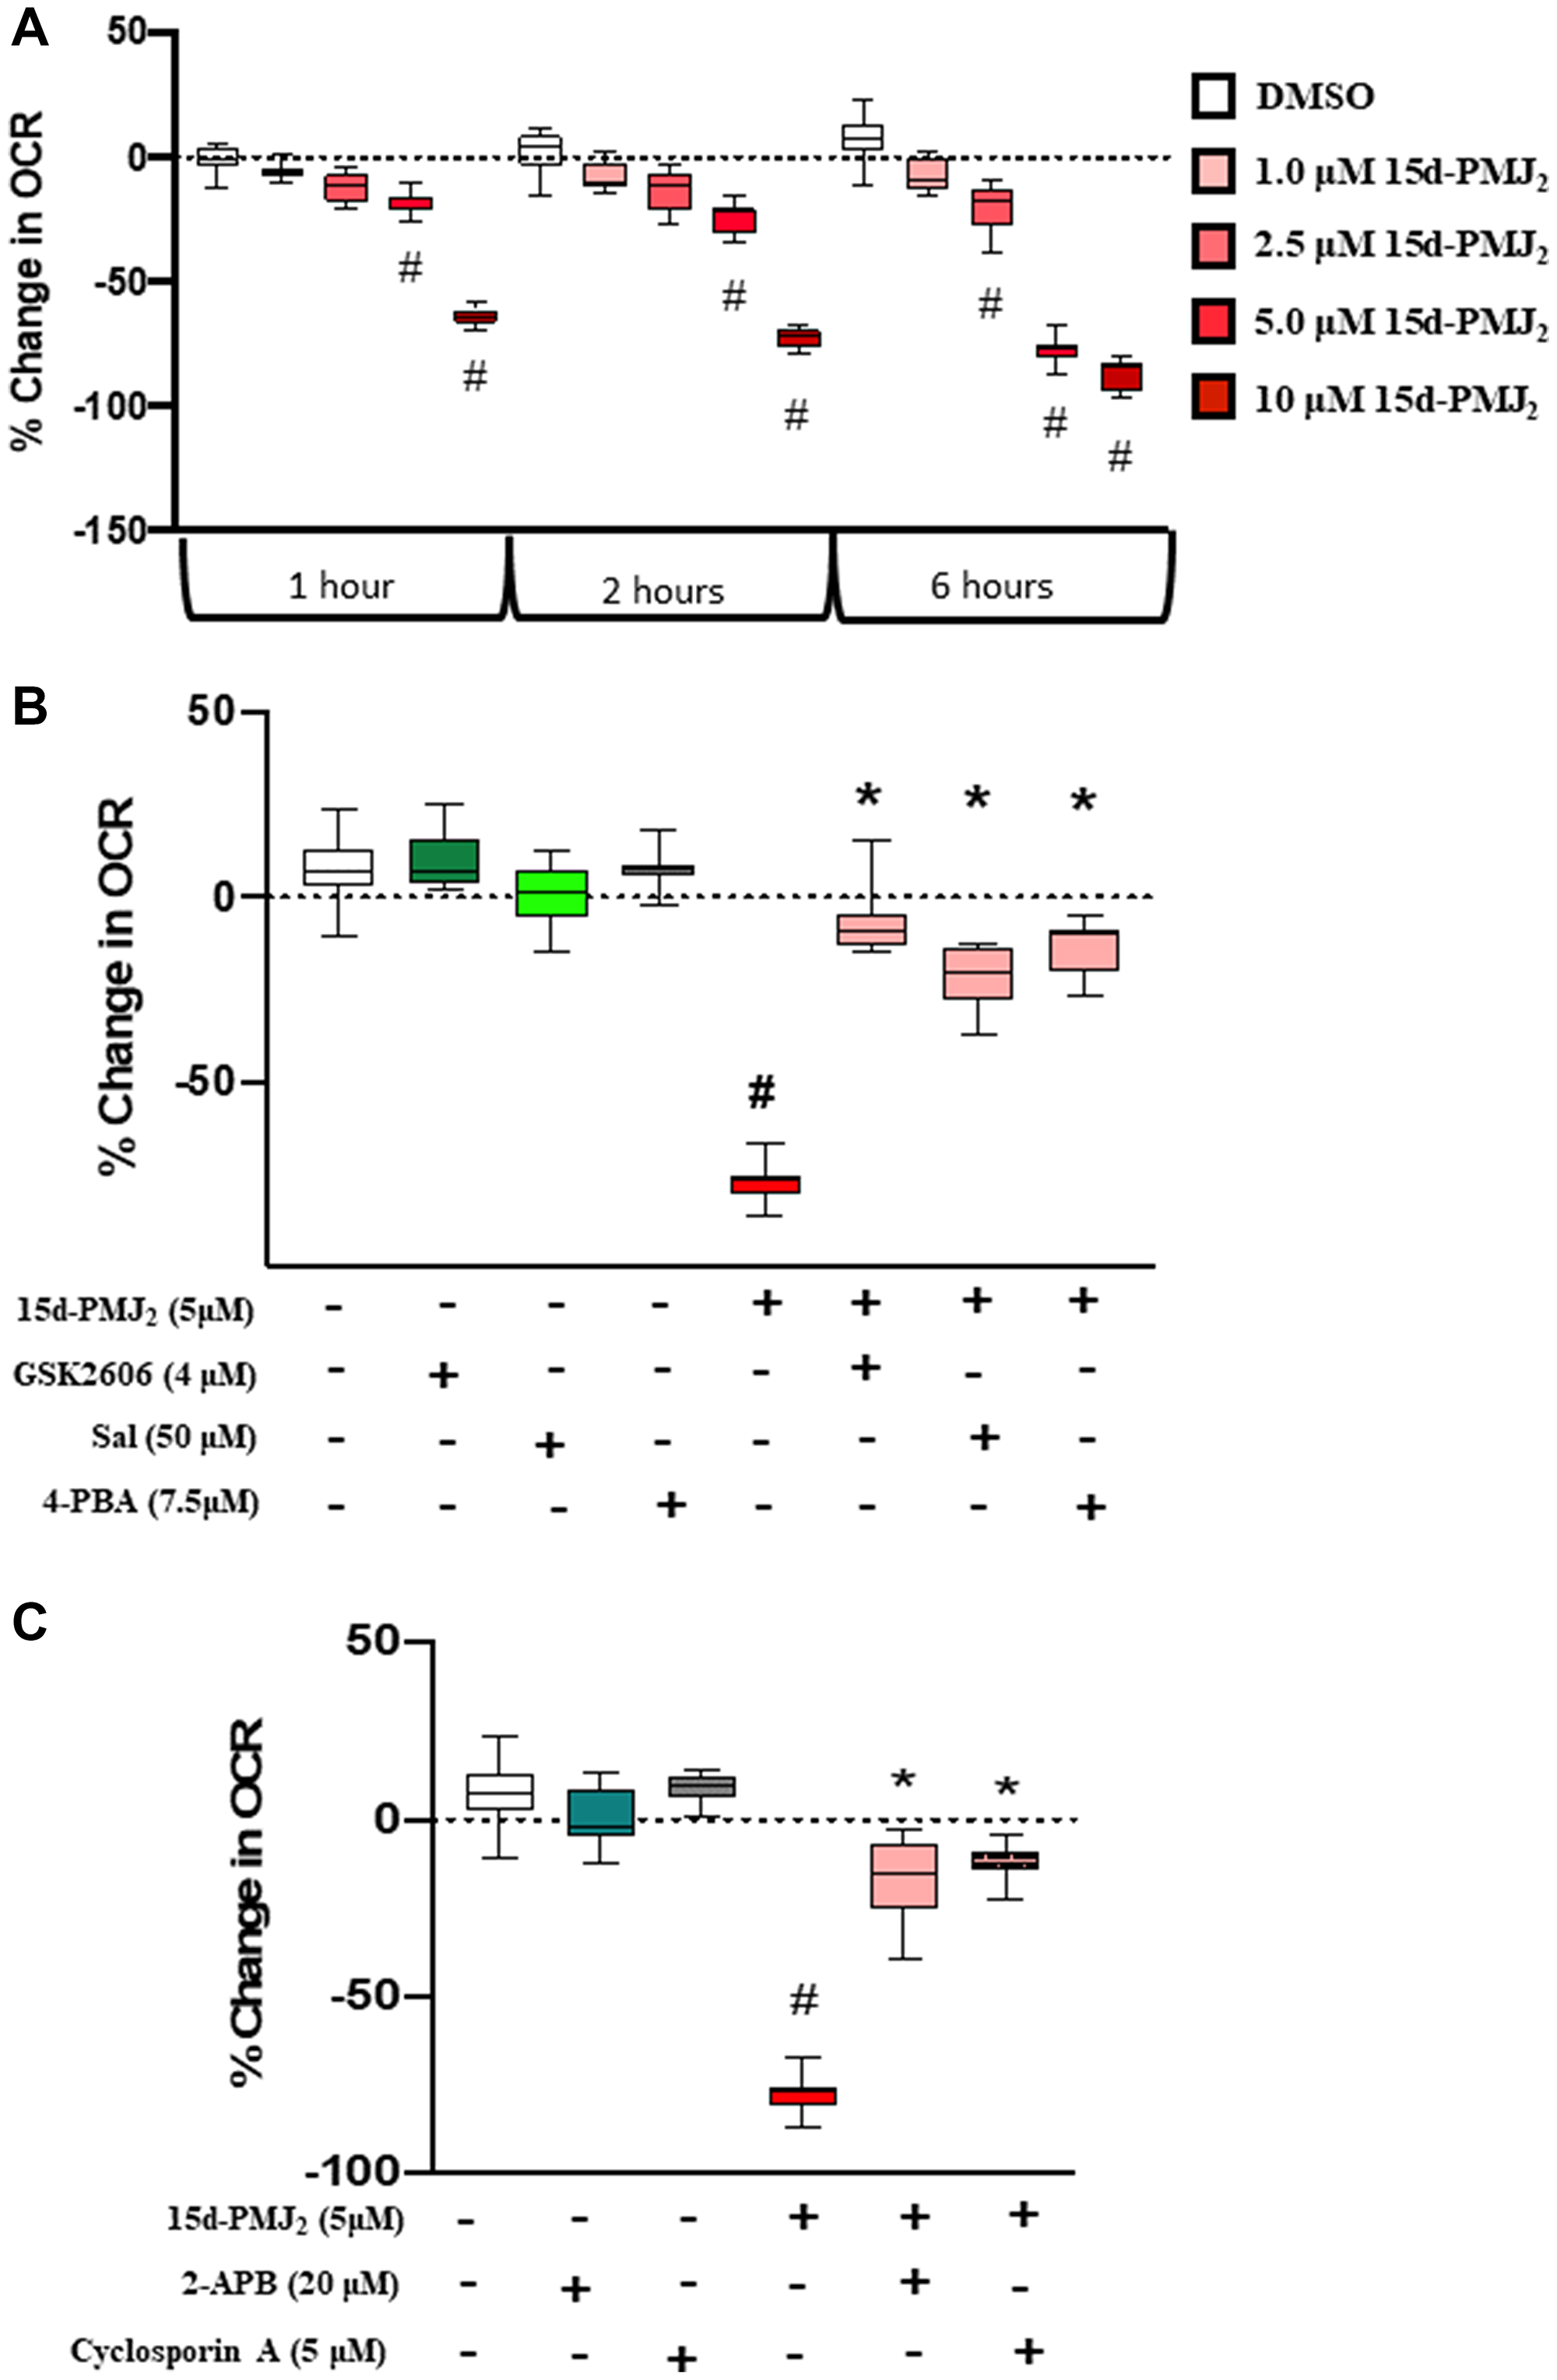 15d-PMJ2 decreases mitochondria respiration in a dose- and ER stress-dependent manner.